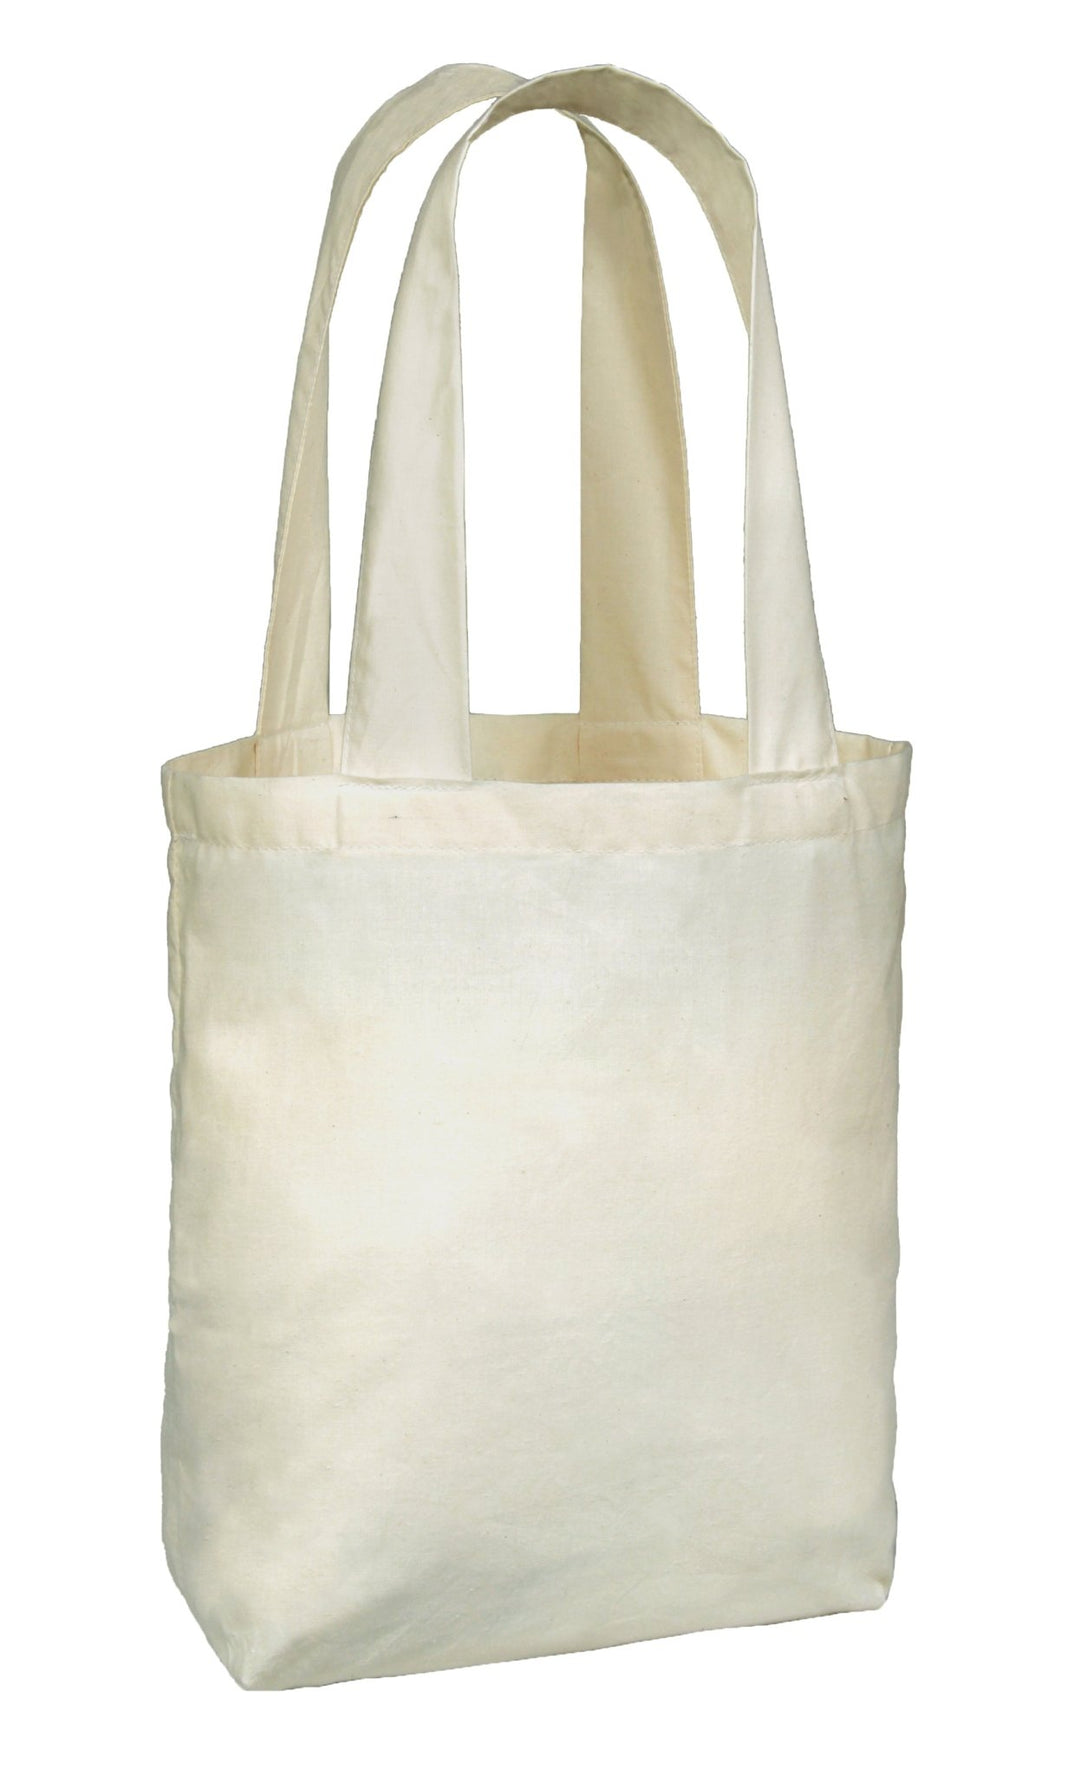 Joyya - Tote Bag with Gusset - Bags - MADE TO ORDER - MBTGC31-NA